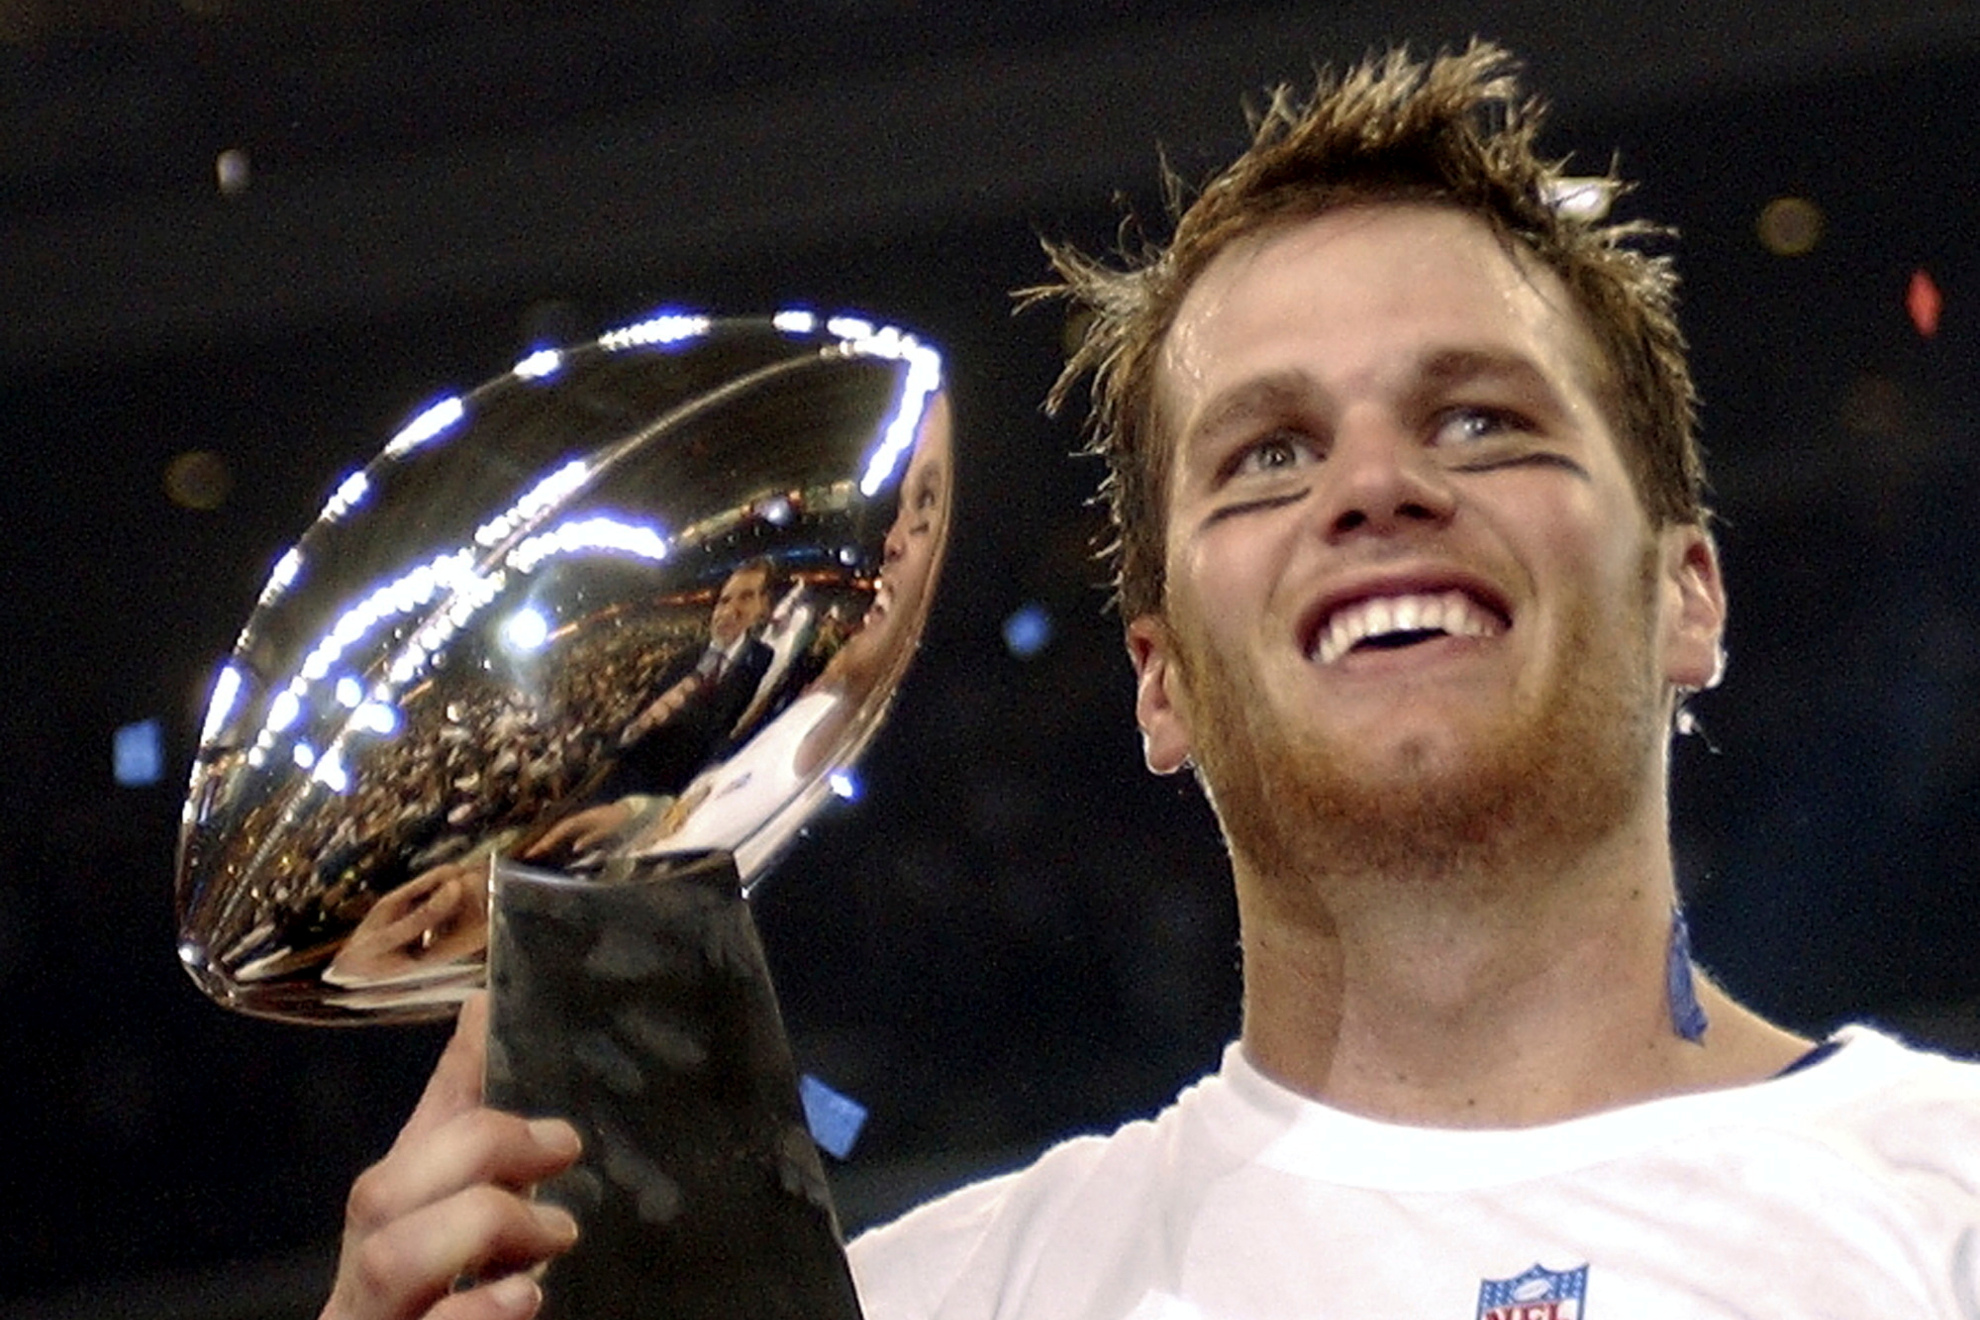 Tom Brady with the Vince Lombardi Trophy after winning one of his Super Bowls.